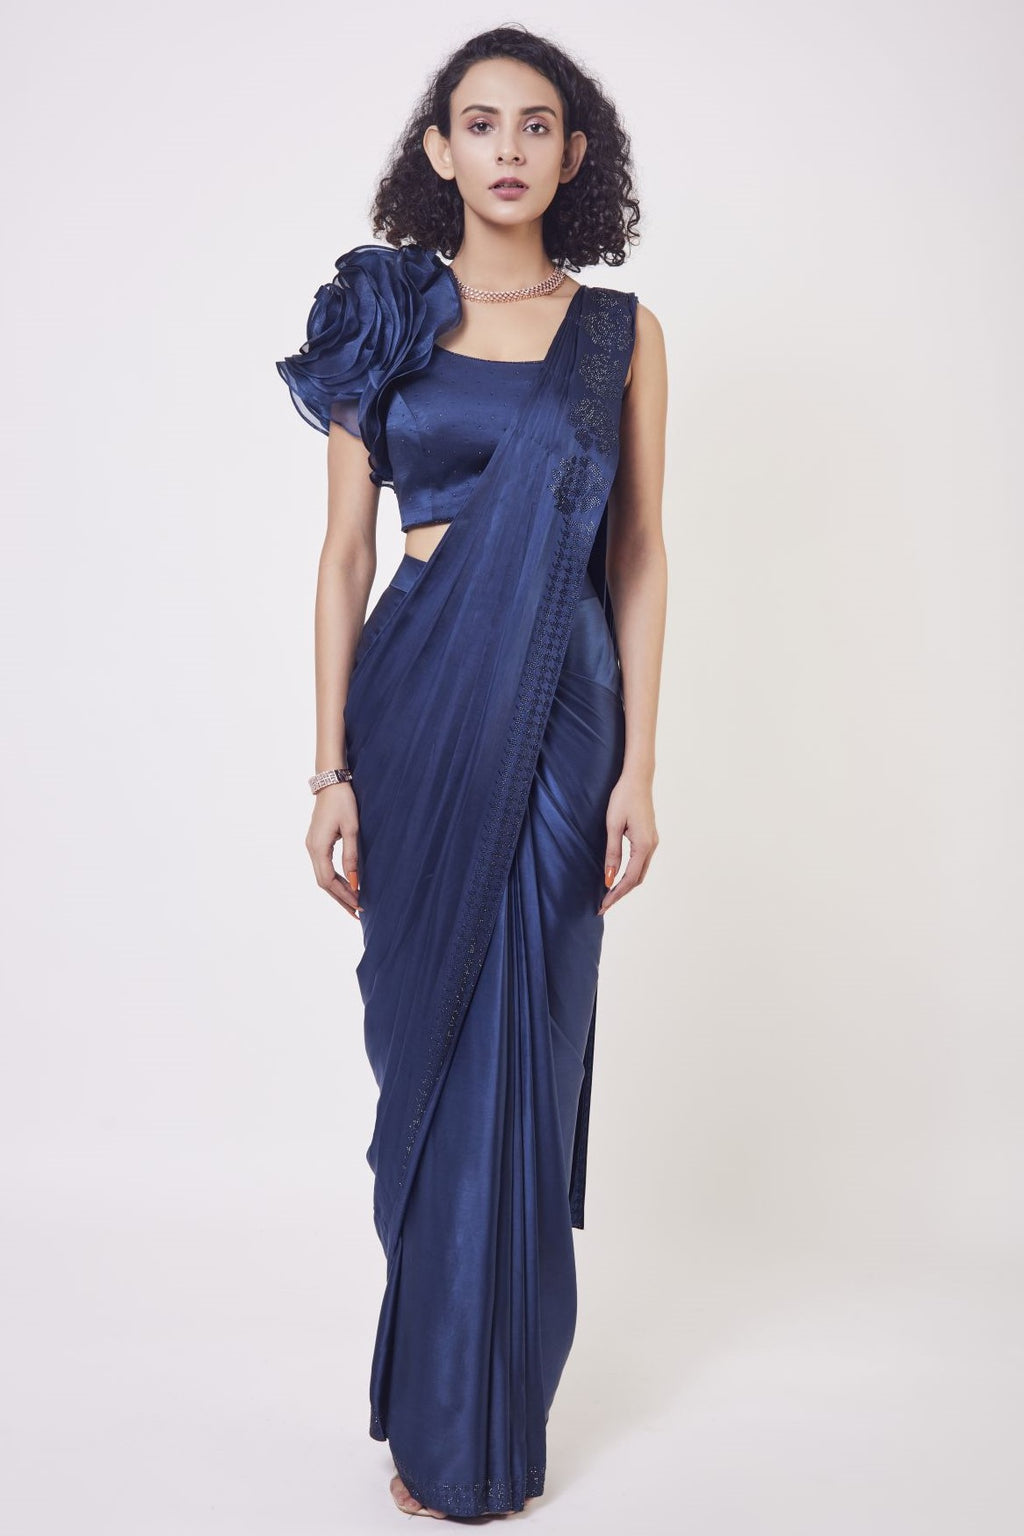 Shop navy blue satin drape dress with a designer blouse and floral design on the shoulder of the blouse. Make a fashion statement on festive occasions and weddings with designer sarees, designer suits, Indian dresses, Anarkali suits, palazzo suits, designer gowns, sharara suits, and embroidered sarees from Pure Elegance Indian fashion store in the USA.